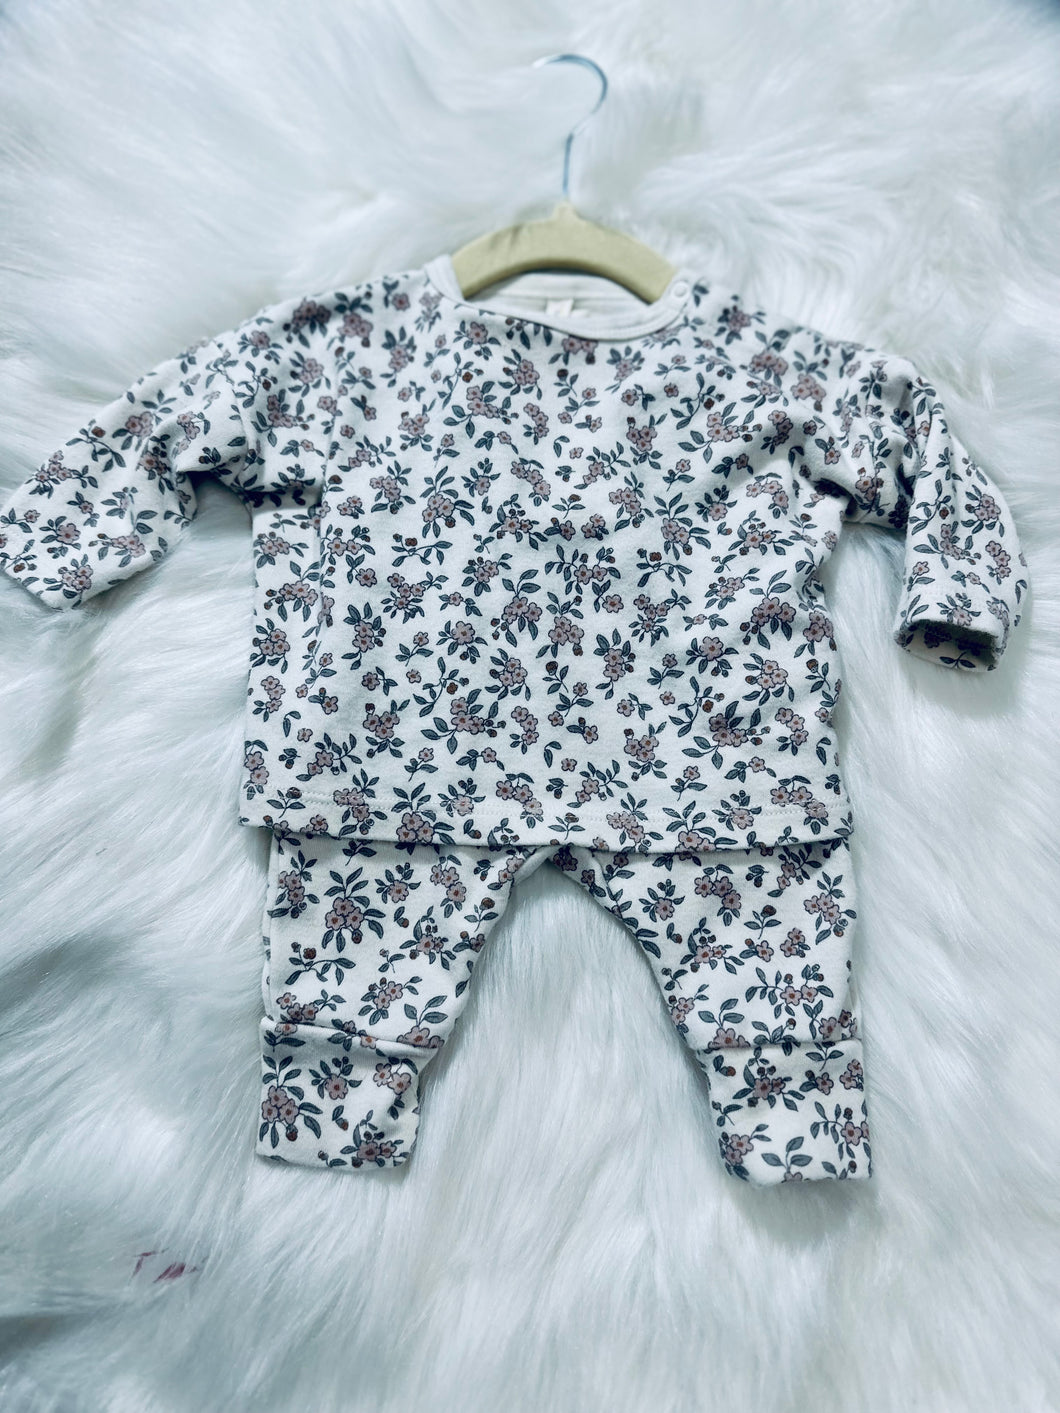 Quincy Mae Two Piece Set 0-3m